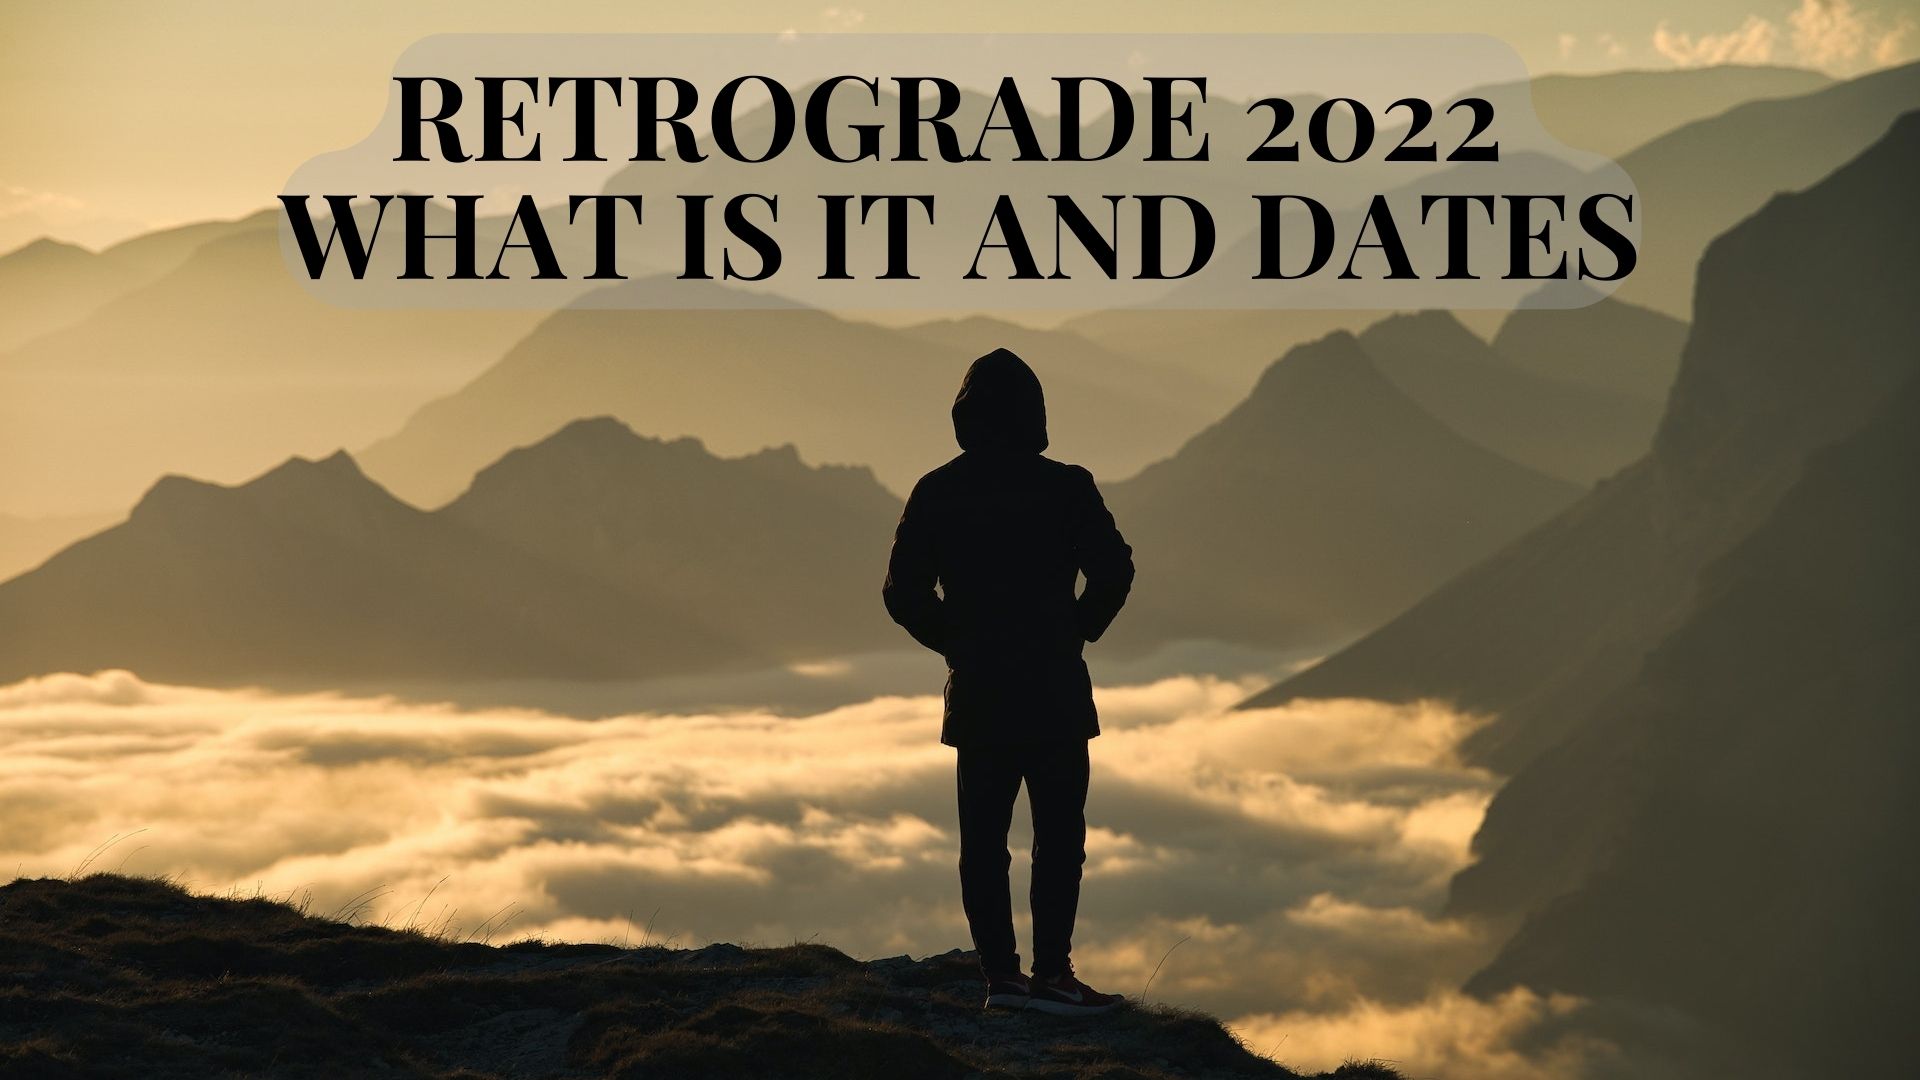 Retrograde 2022 - What Is It And Dates